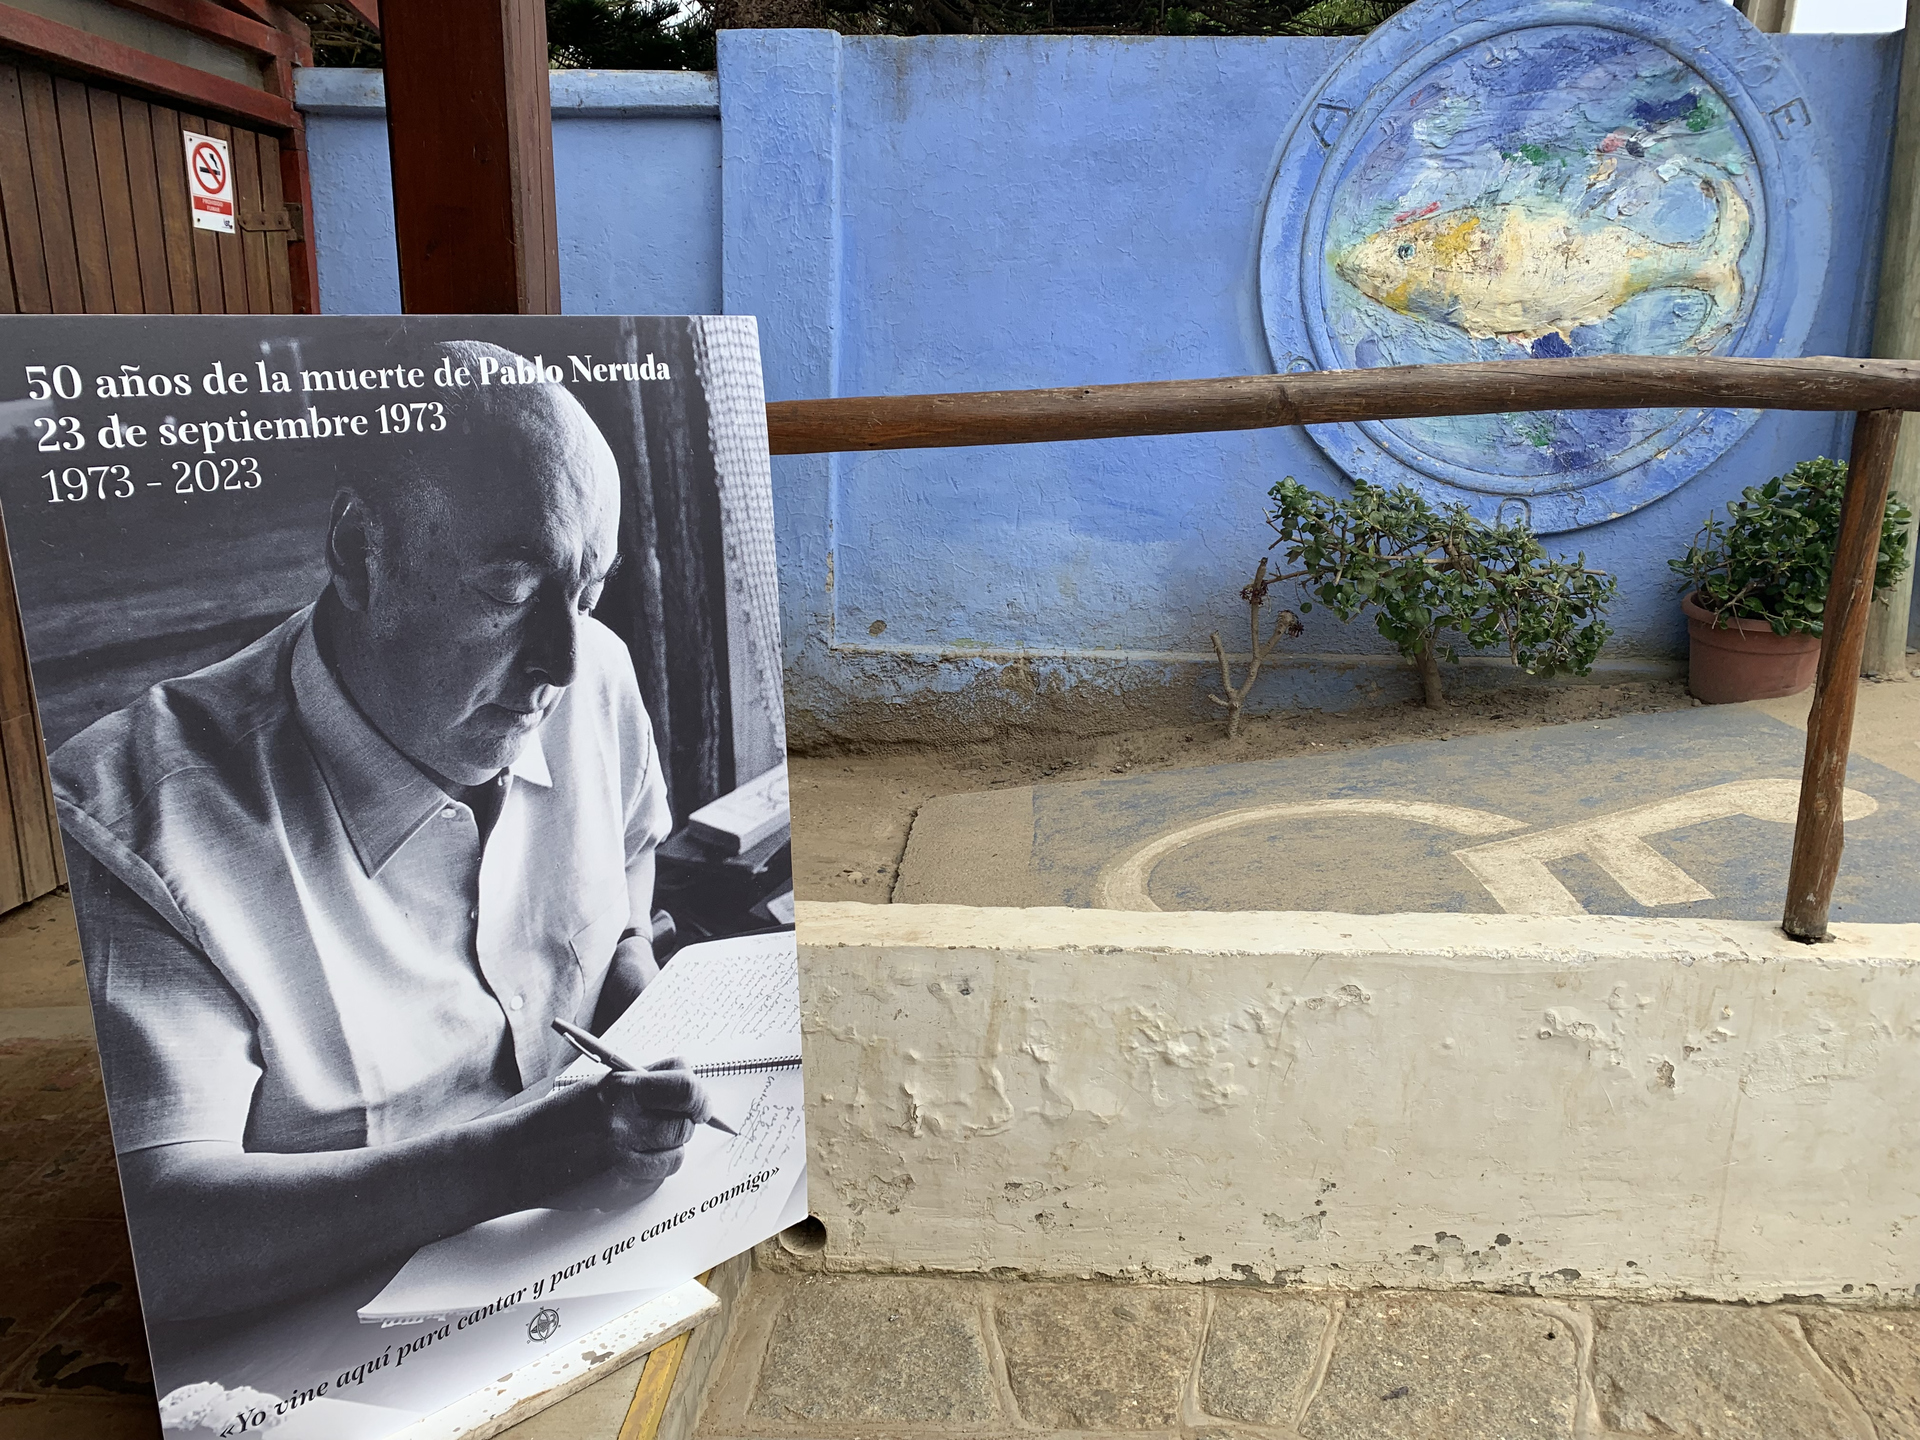 Venezuela remembers the poet Pablo Neruda on the 50th anniversary of his death